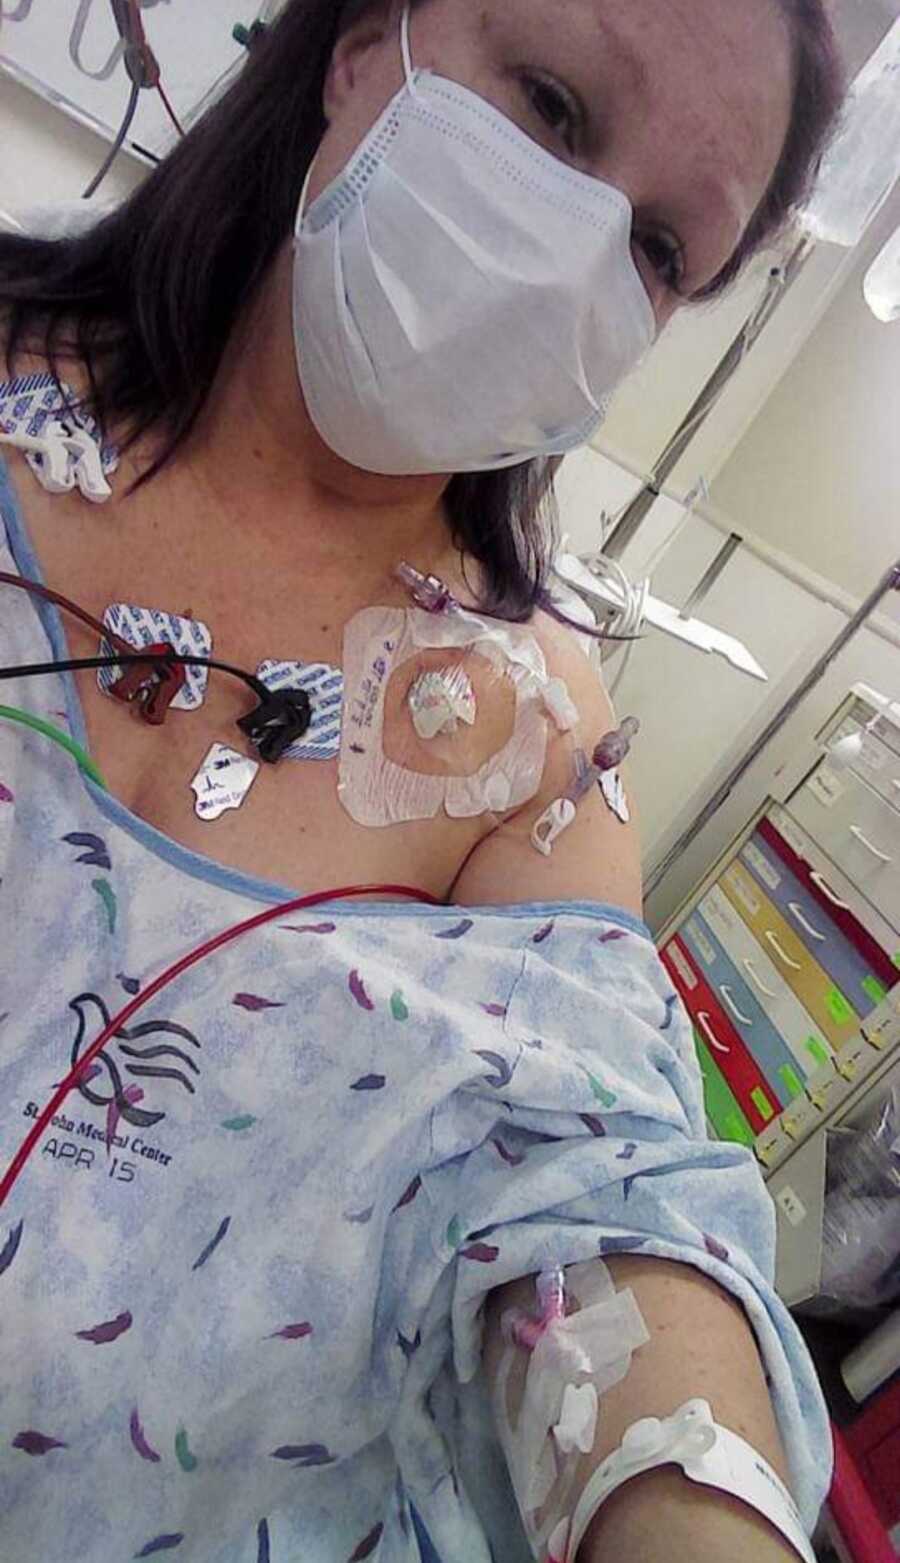 woman hooked up to hospital machines to see about her cancer